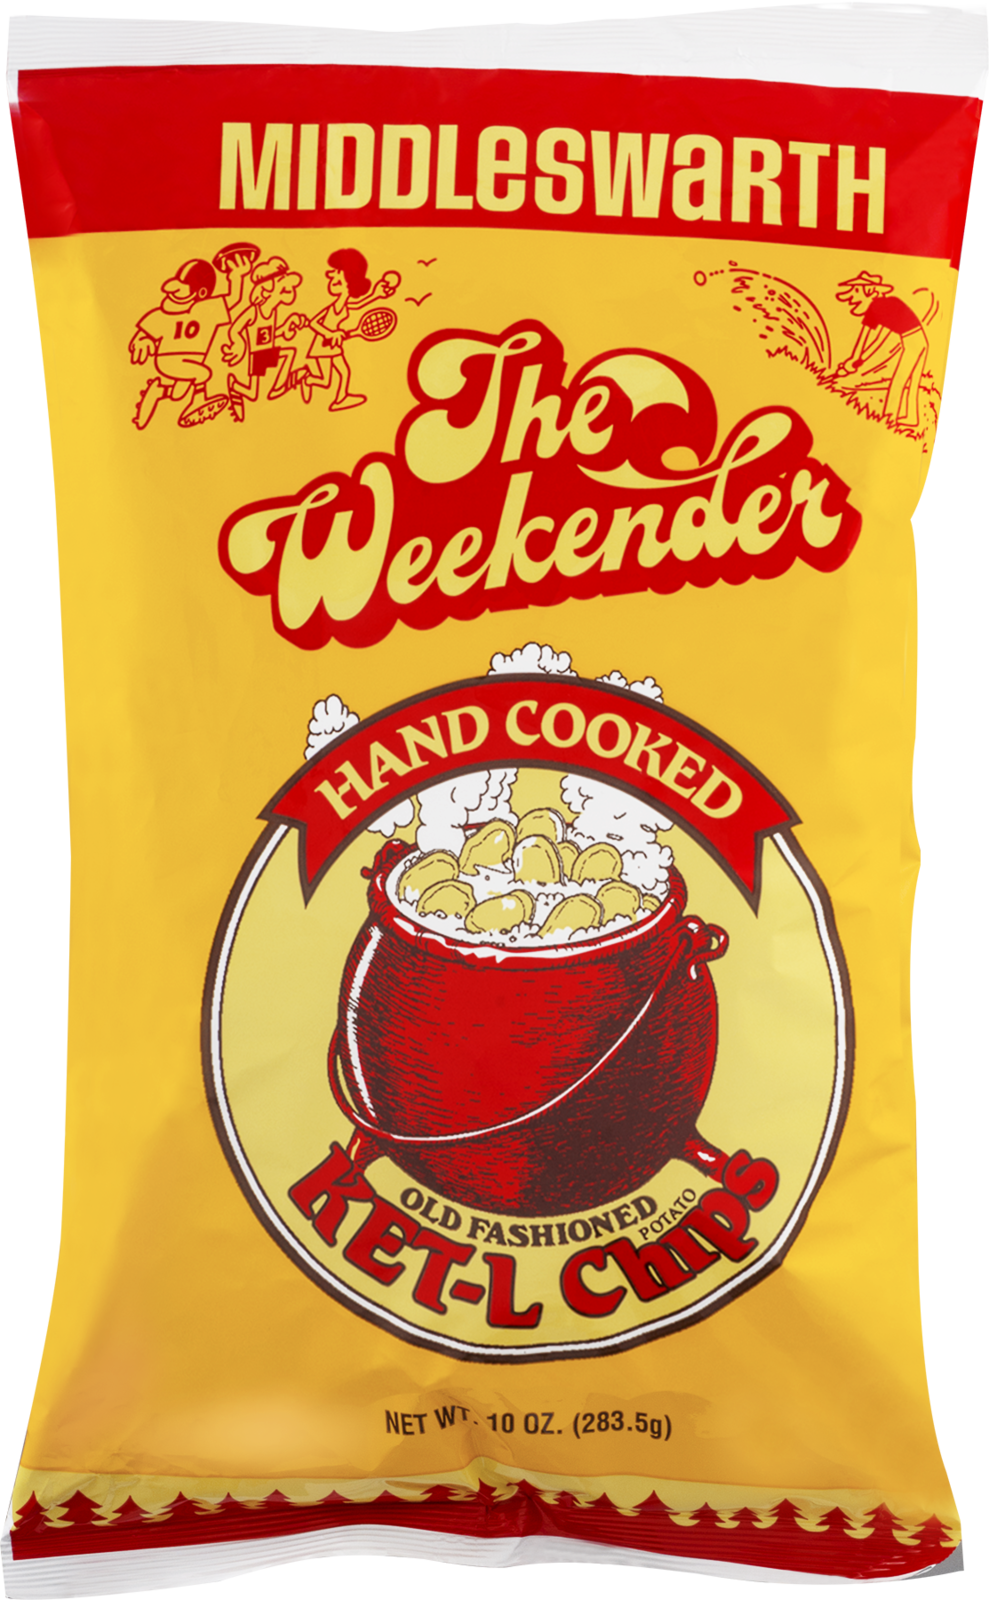 Middleswarth Hand Cooked Old Fashioned KET-L Potato Chips The Weekender (3 Bags) - $28.99